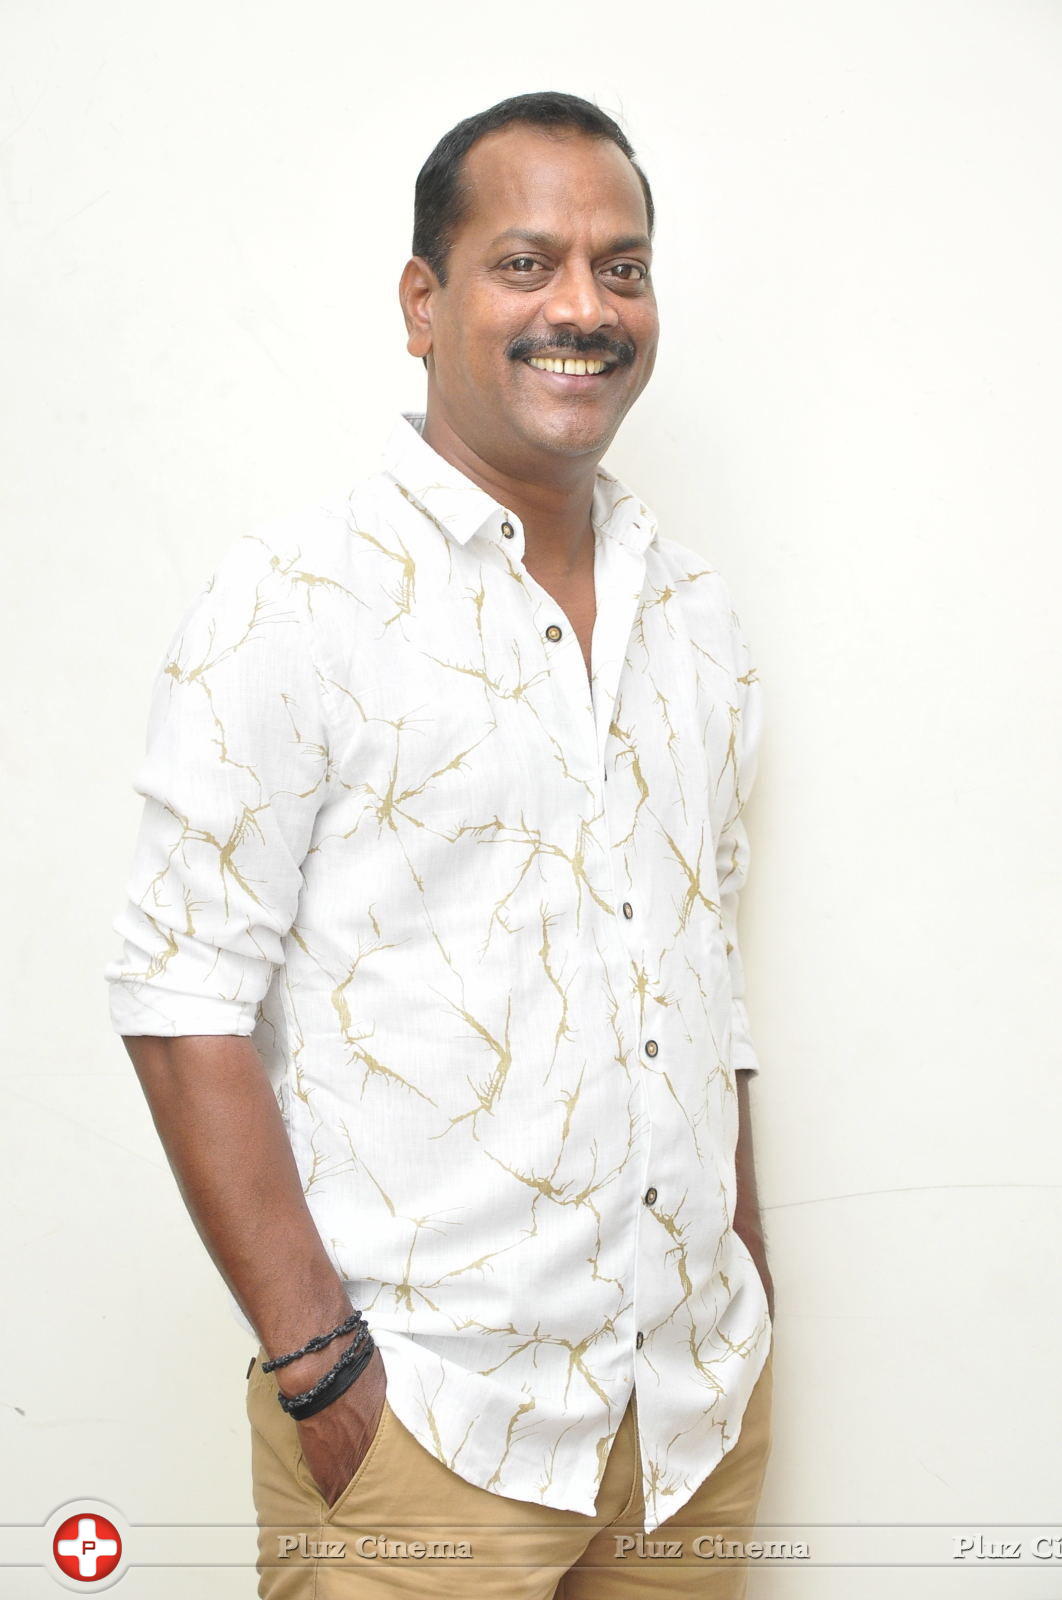 Director A S Ravi Kumar Chowdary Interview Stills | Picture 1183877